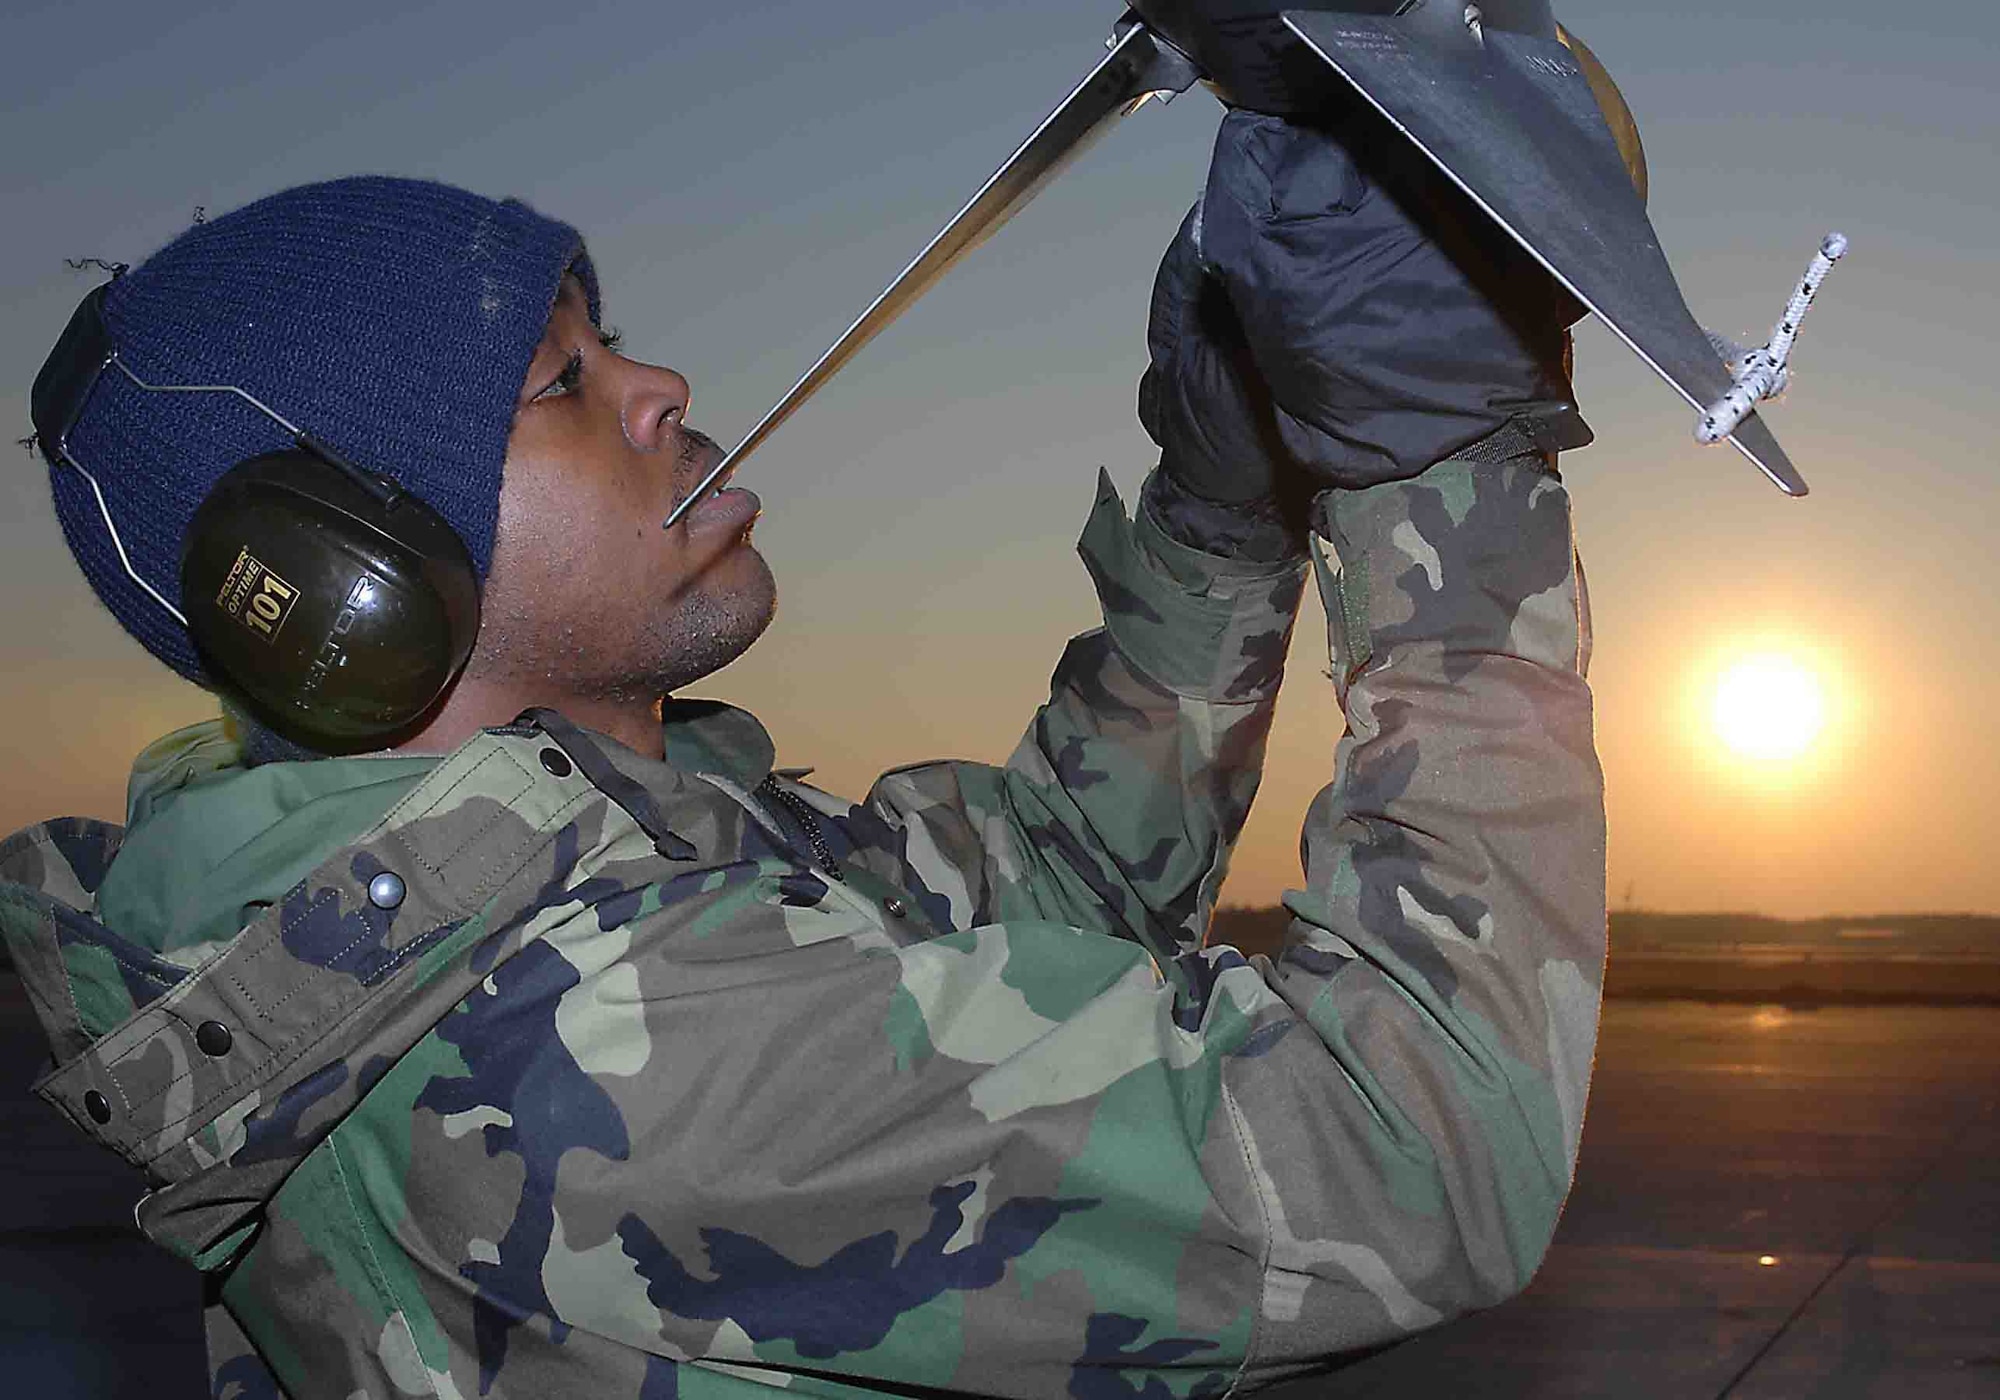 SHAW AIR FORCE BASE, S.C. -- Airman 1st Class Wilbert Dixon, 77th Aircraft Maintenance Unit aircraft armament systems journeyman, replaces the cooling component Argon on an AIM-9 missile Feb. 7 during the Operation Iron Thunder exercise. More than 100 aircraft participated in the four-day exercise. (U.S. Air Force photo/Airman 1st Class Matthew Davis)